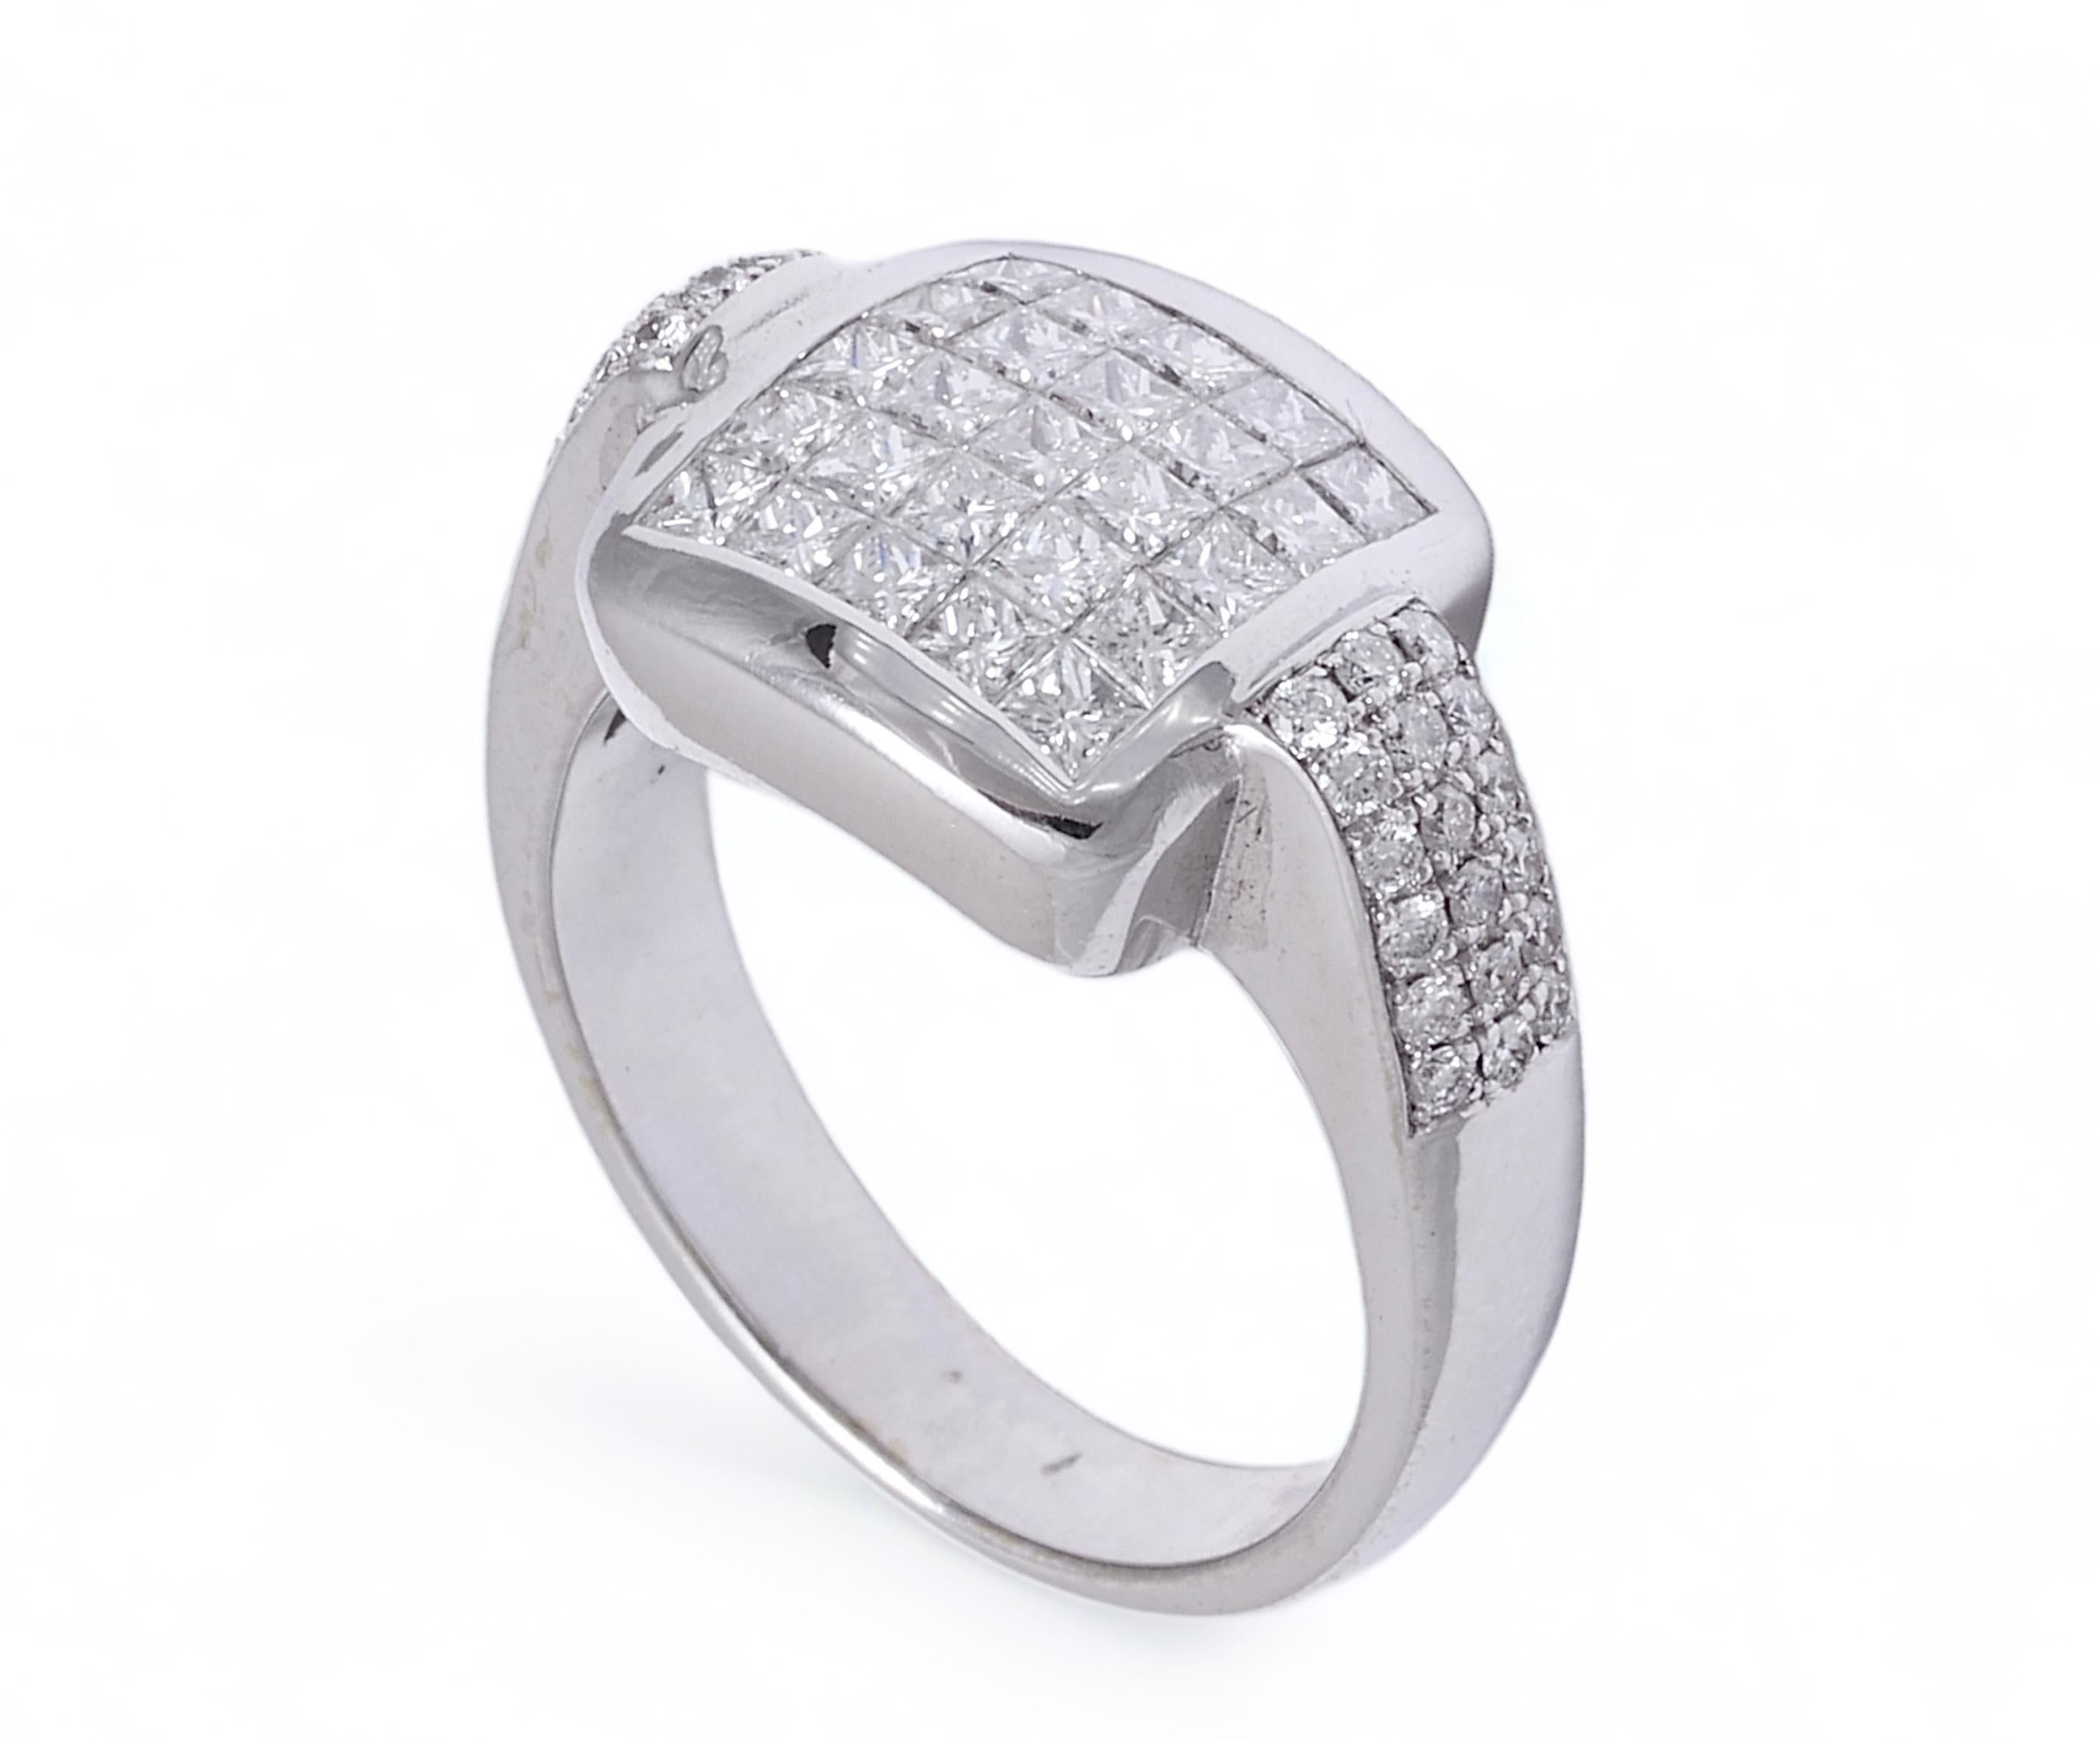 Gorgeous 18 kt. White Gold Ring With Invisible Set Princess Cut and Brilliant Cut Diamonds together 1.61 ct.

Diamonds: Brilliant and princess cut diamonds, together 1.61 ct.

Material: 18 kt. white gold

Ring size: 53.8 EU / 6.75 US ( can be